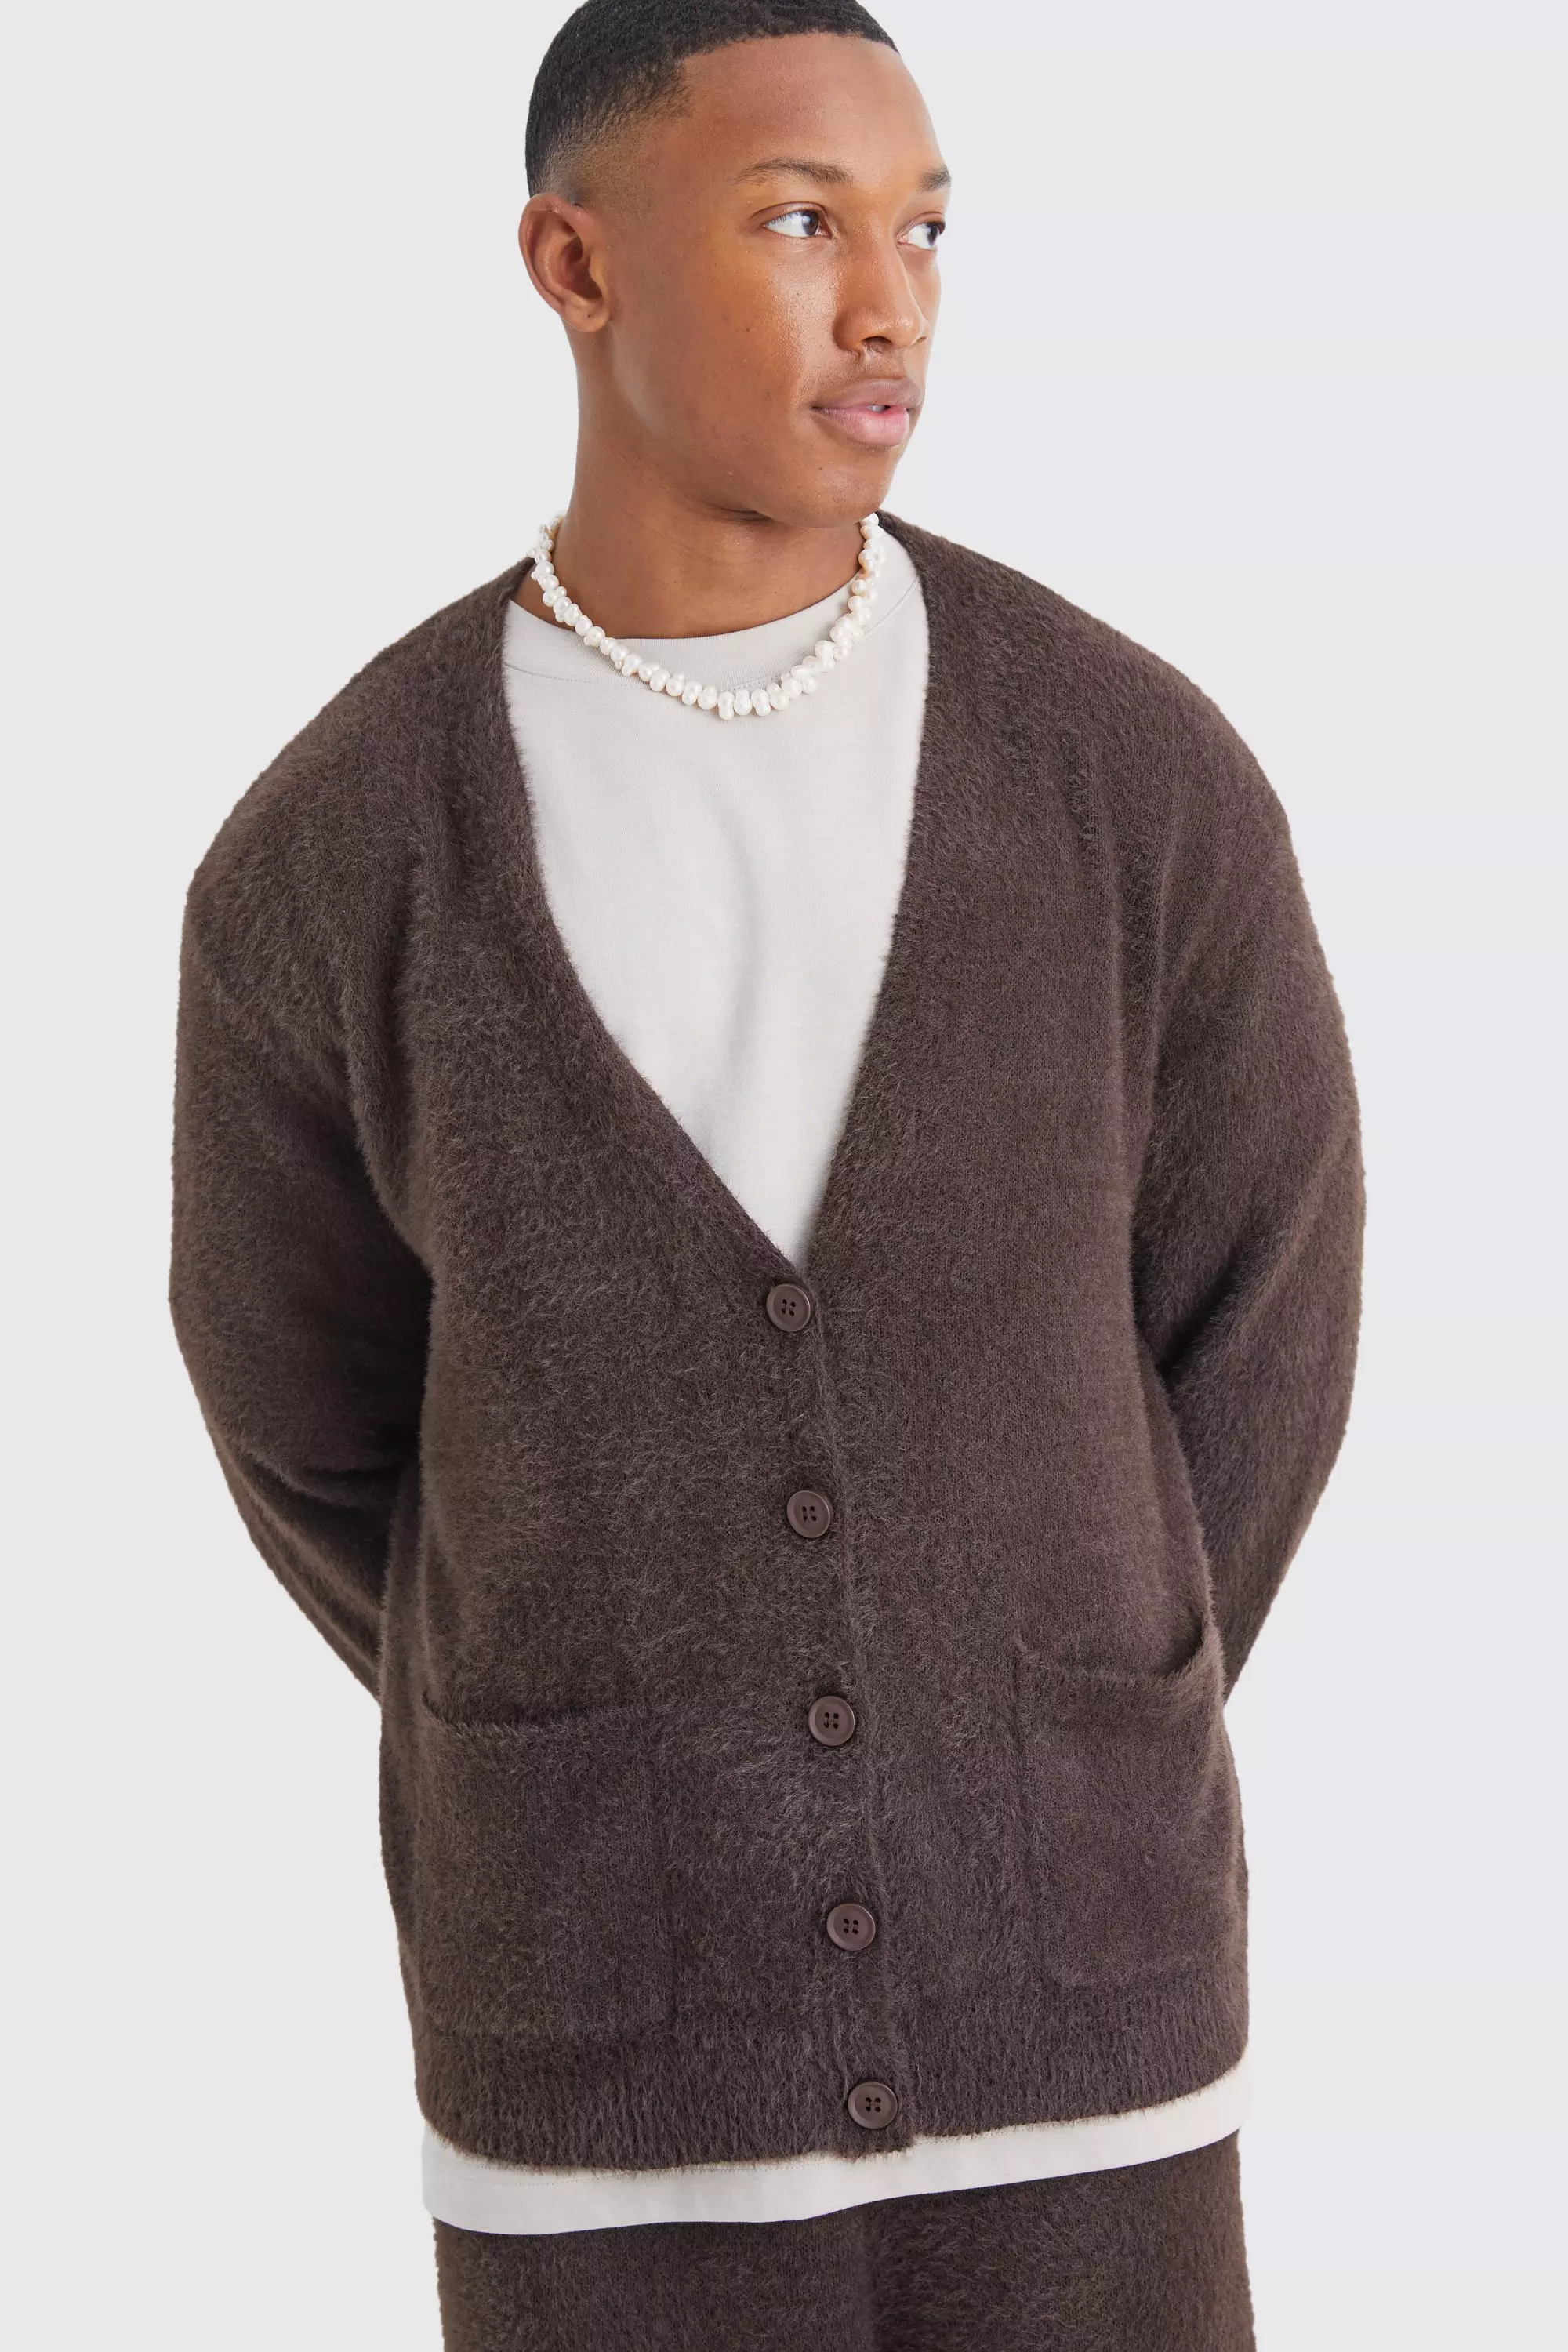 Chocolate Brown Boxy Fluffy Knitted Cardigan